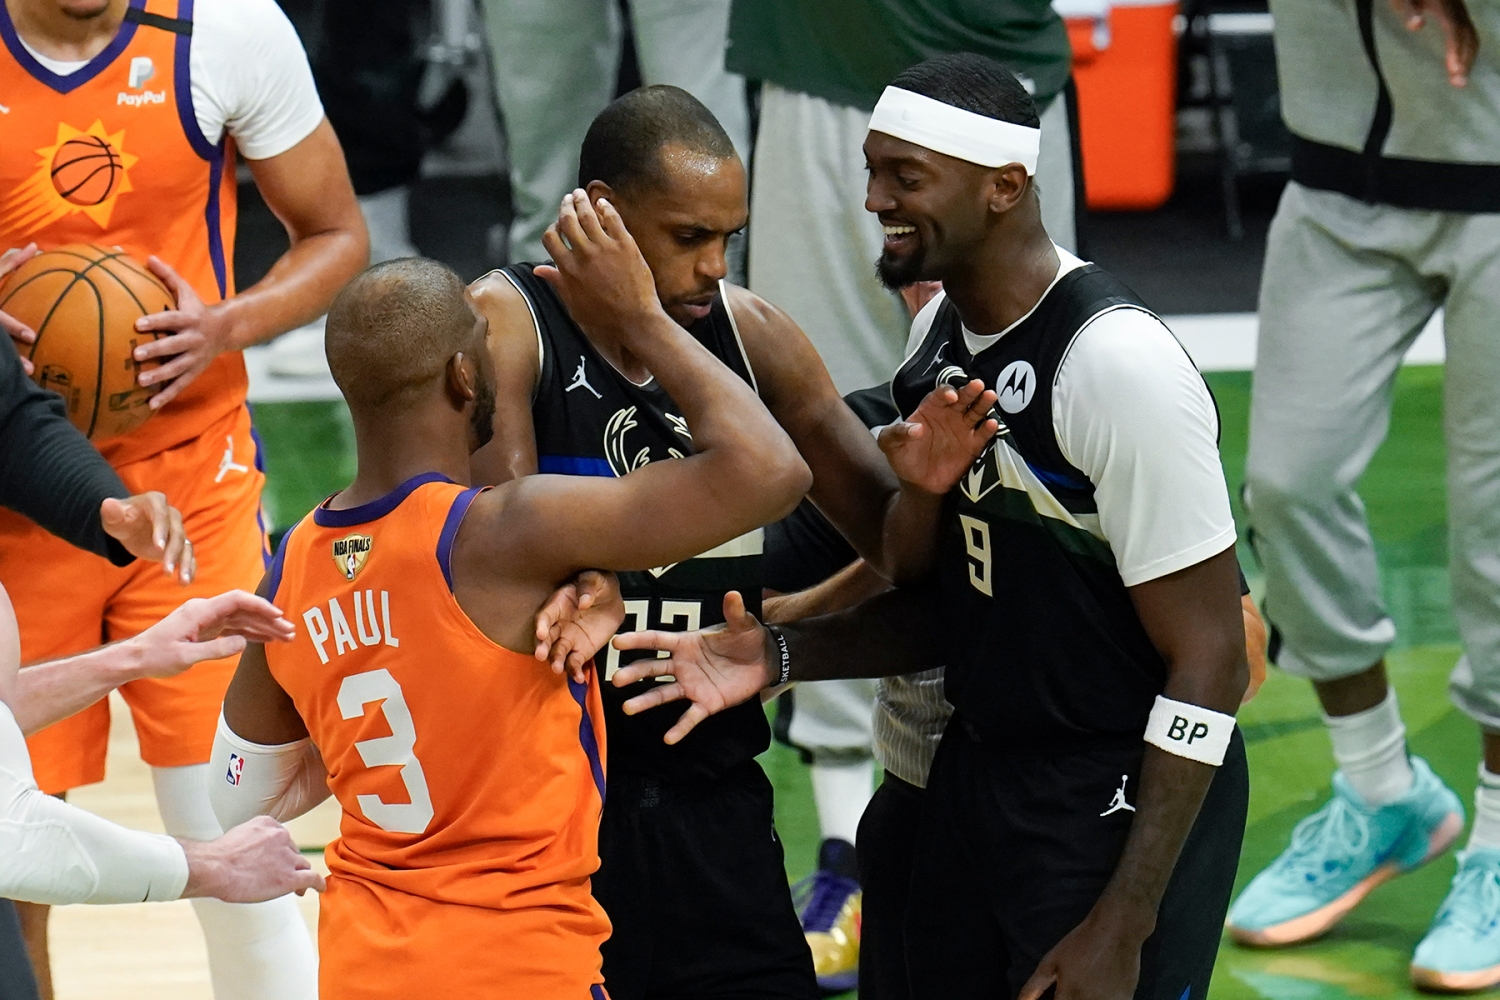 Phoenix Suns guard Chris Paul (3) is separated from Milwaukee Bucks center Bobby Portis (9) by Khris Middleton, center, during the second half of Game 6 of basketball's NBA Finals in Milwaukee, Tuesday, July 20, 2021. (AP Photo/Paul Sancya)